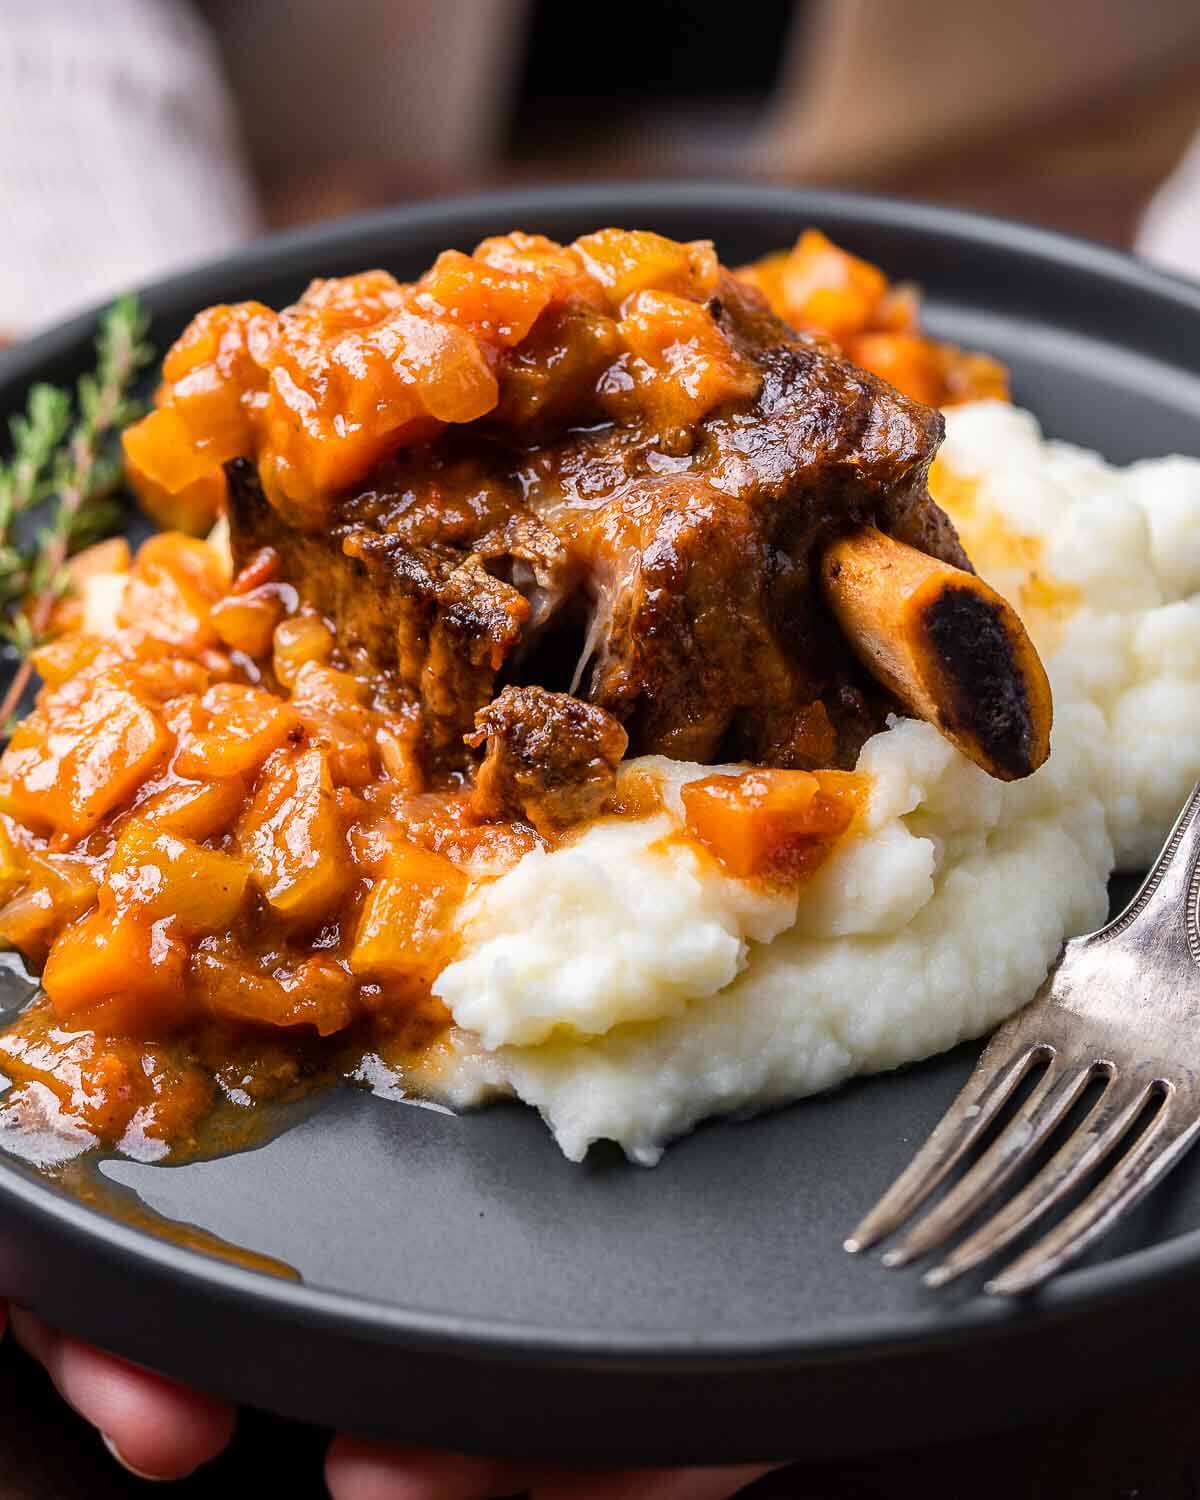 Hands holding plate of braised short ribs on mashed potatoes.